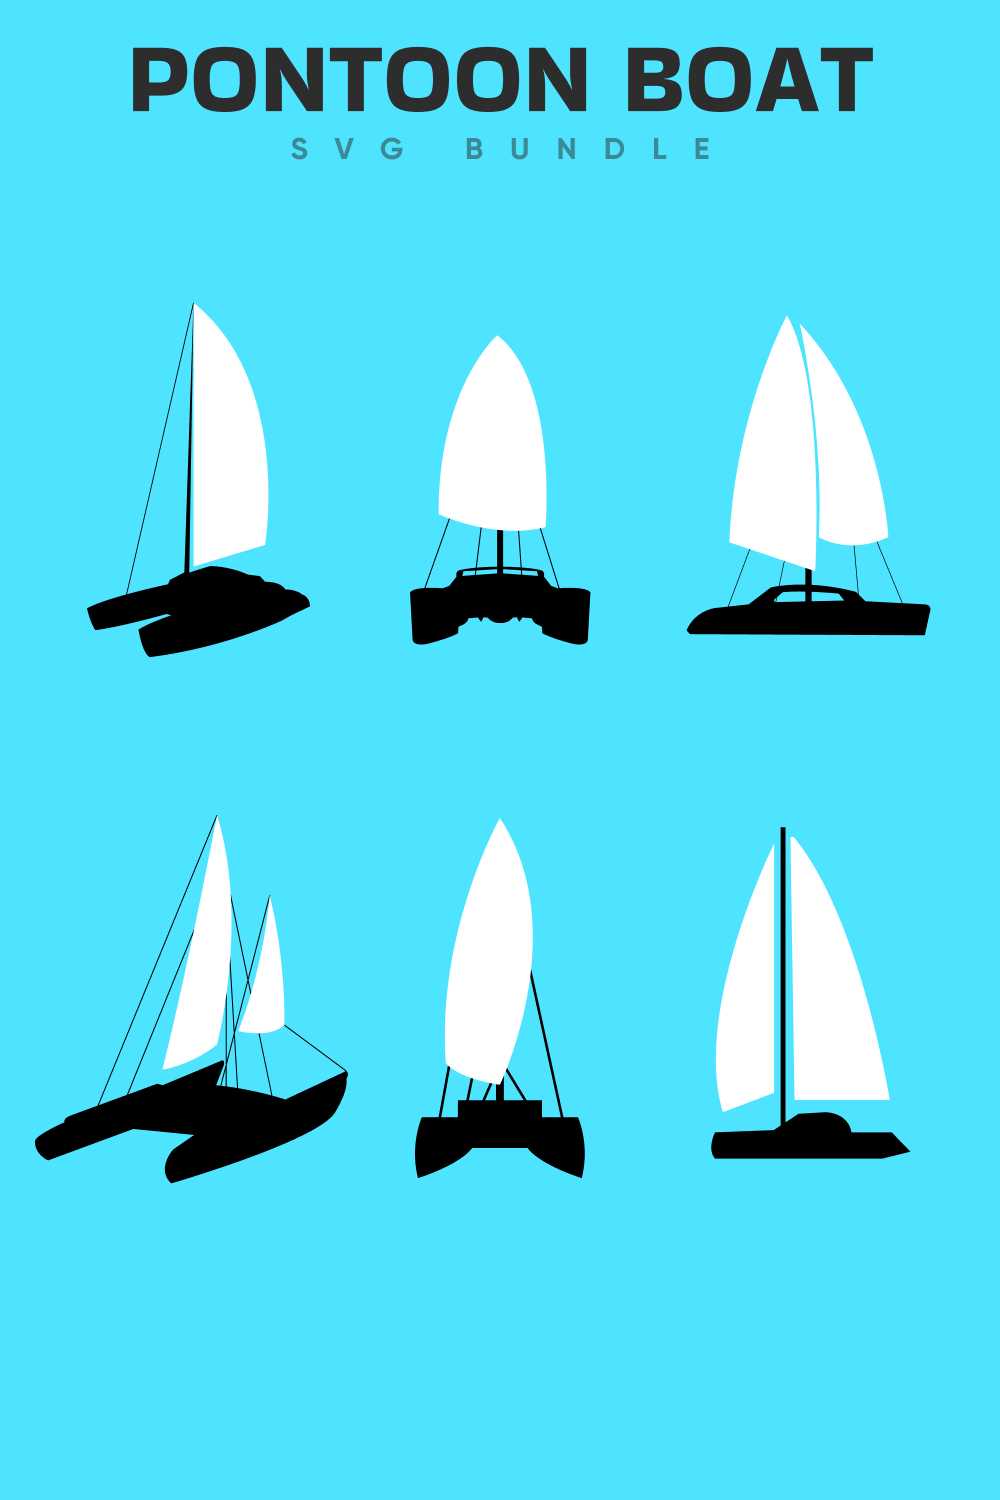 Some classic options of the pontoon boats.